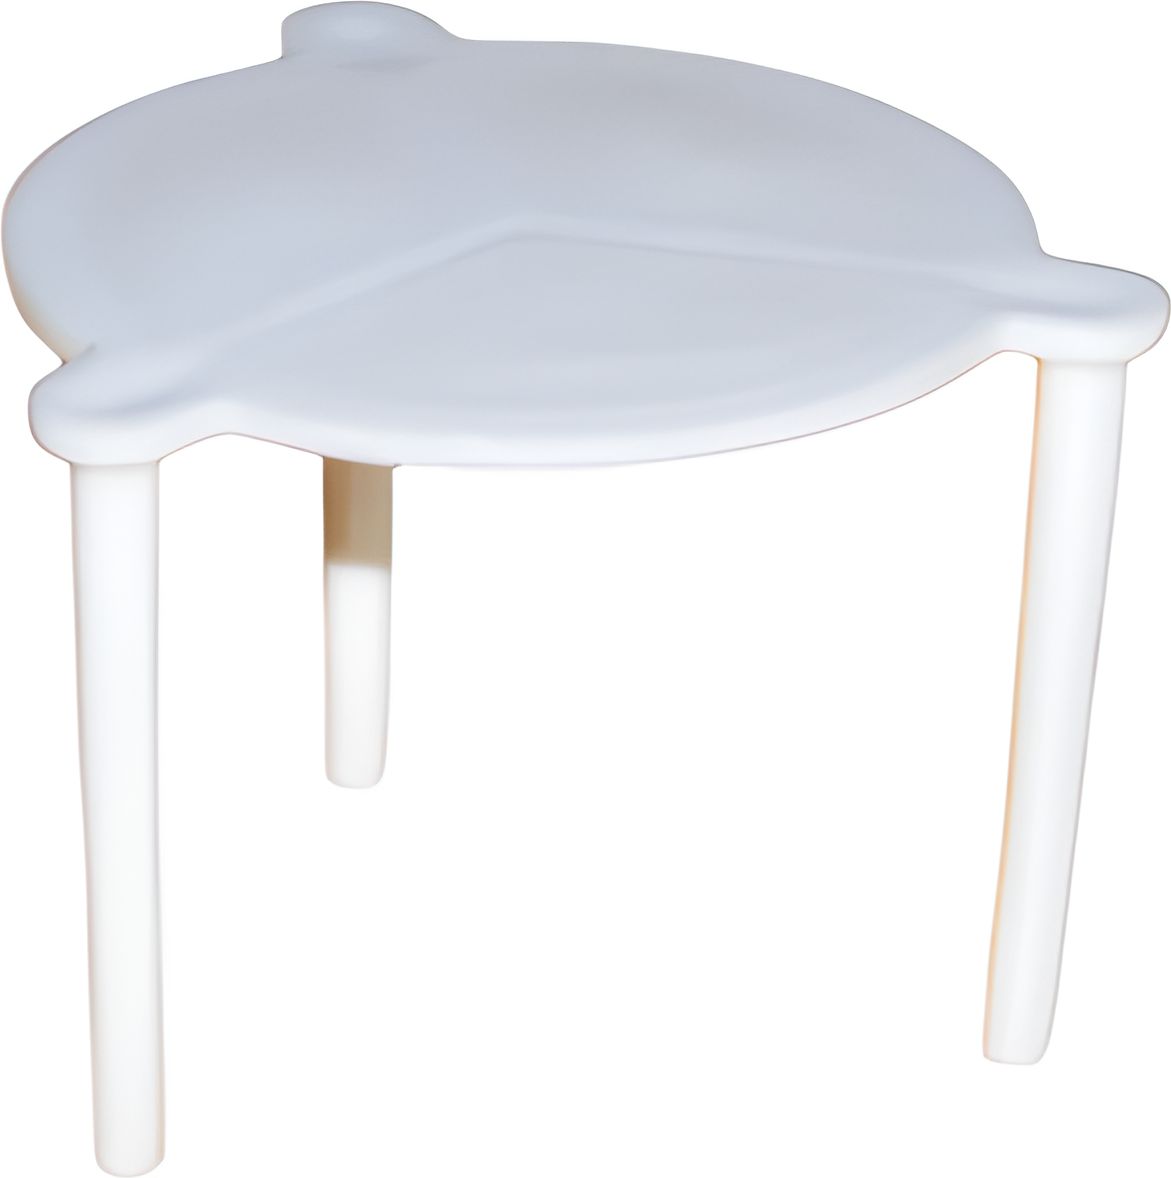 Hy-Stix - White Pizza Savers Stand/Holder, 1000/Cs - PS950-IN